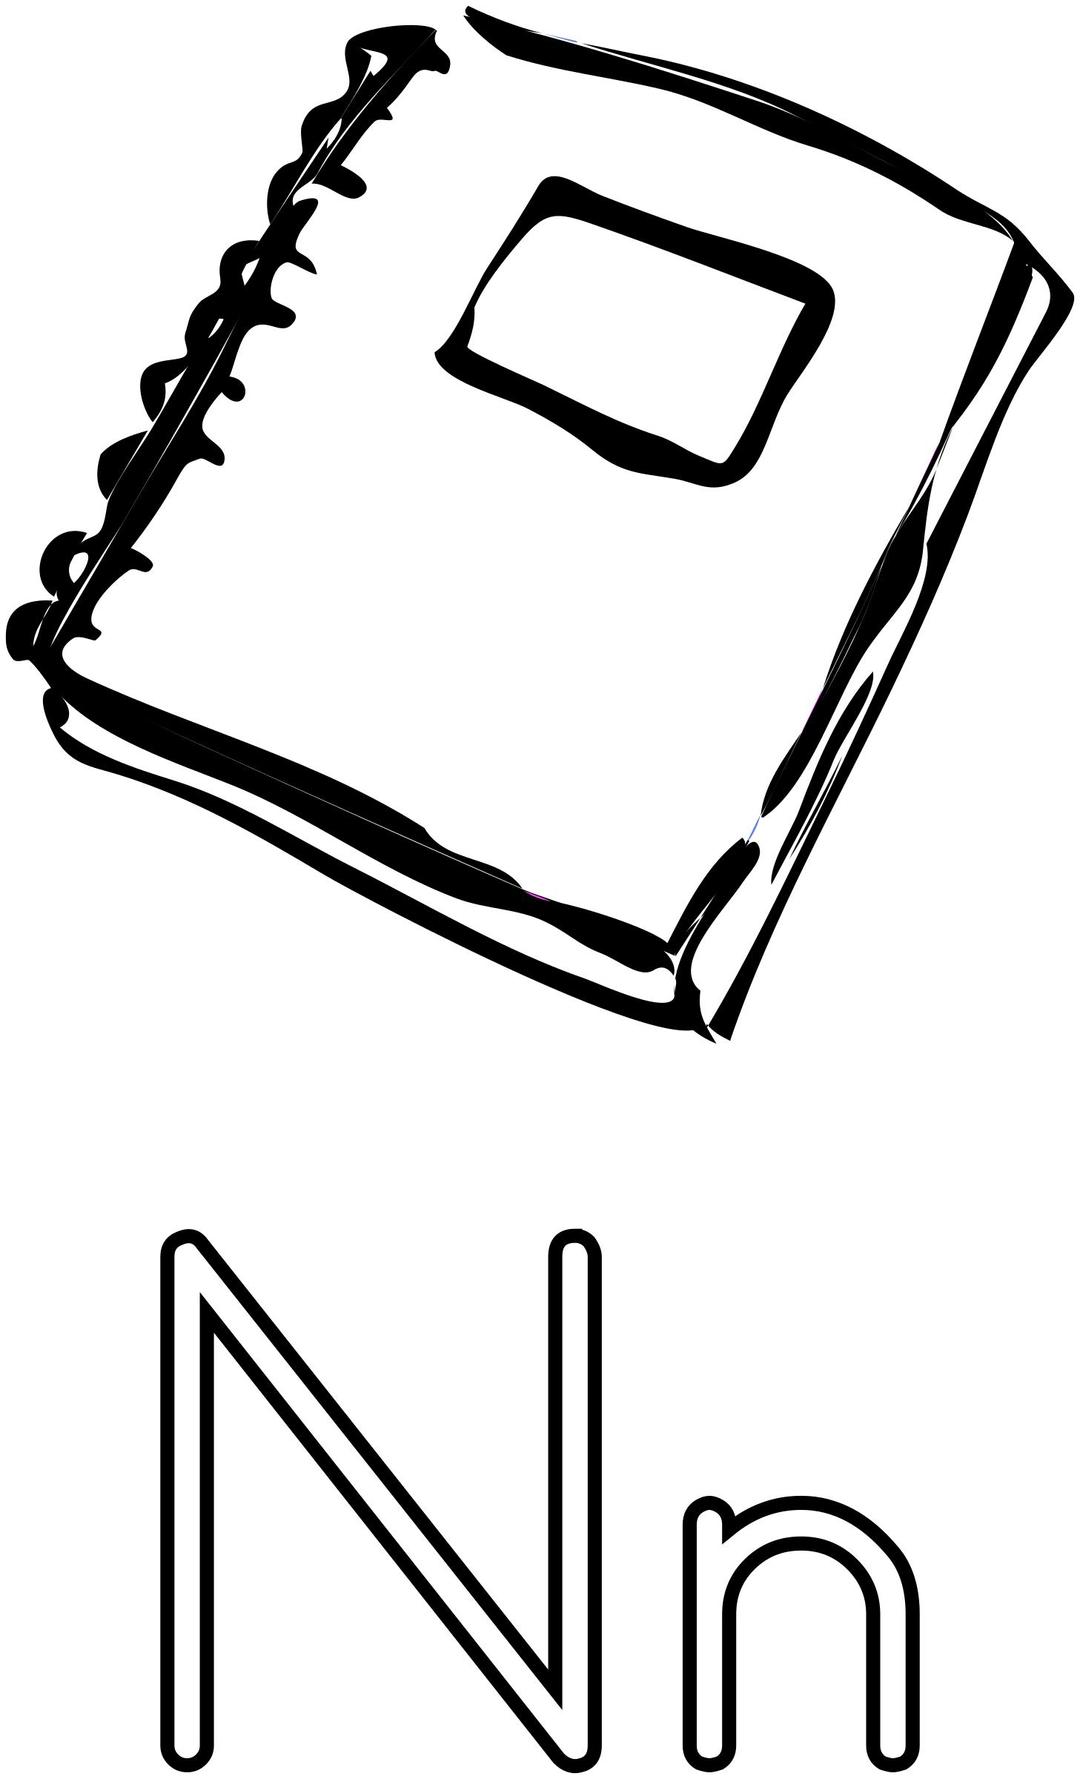 N Is For Notebook png transparent